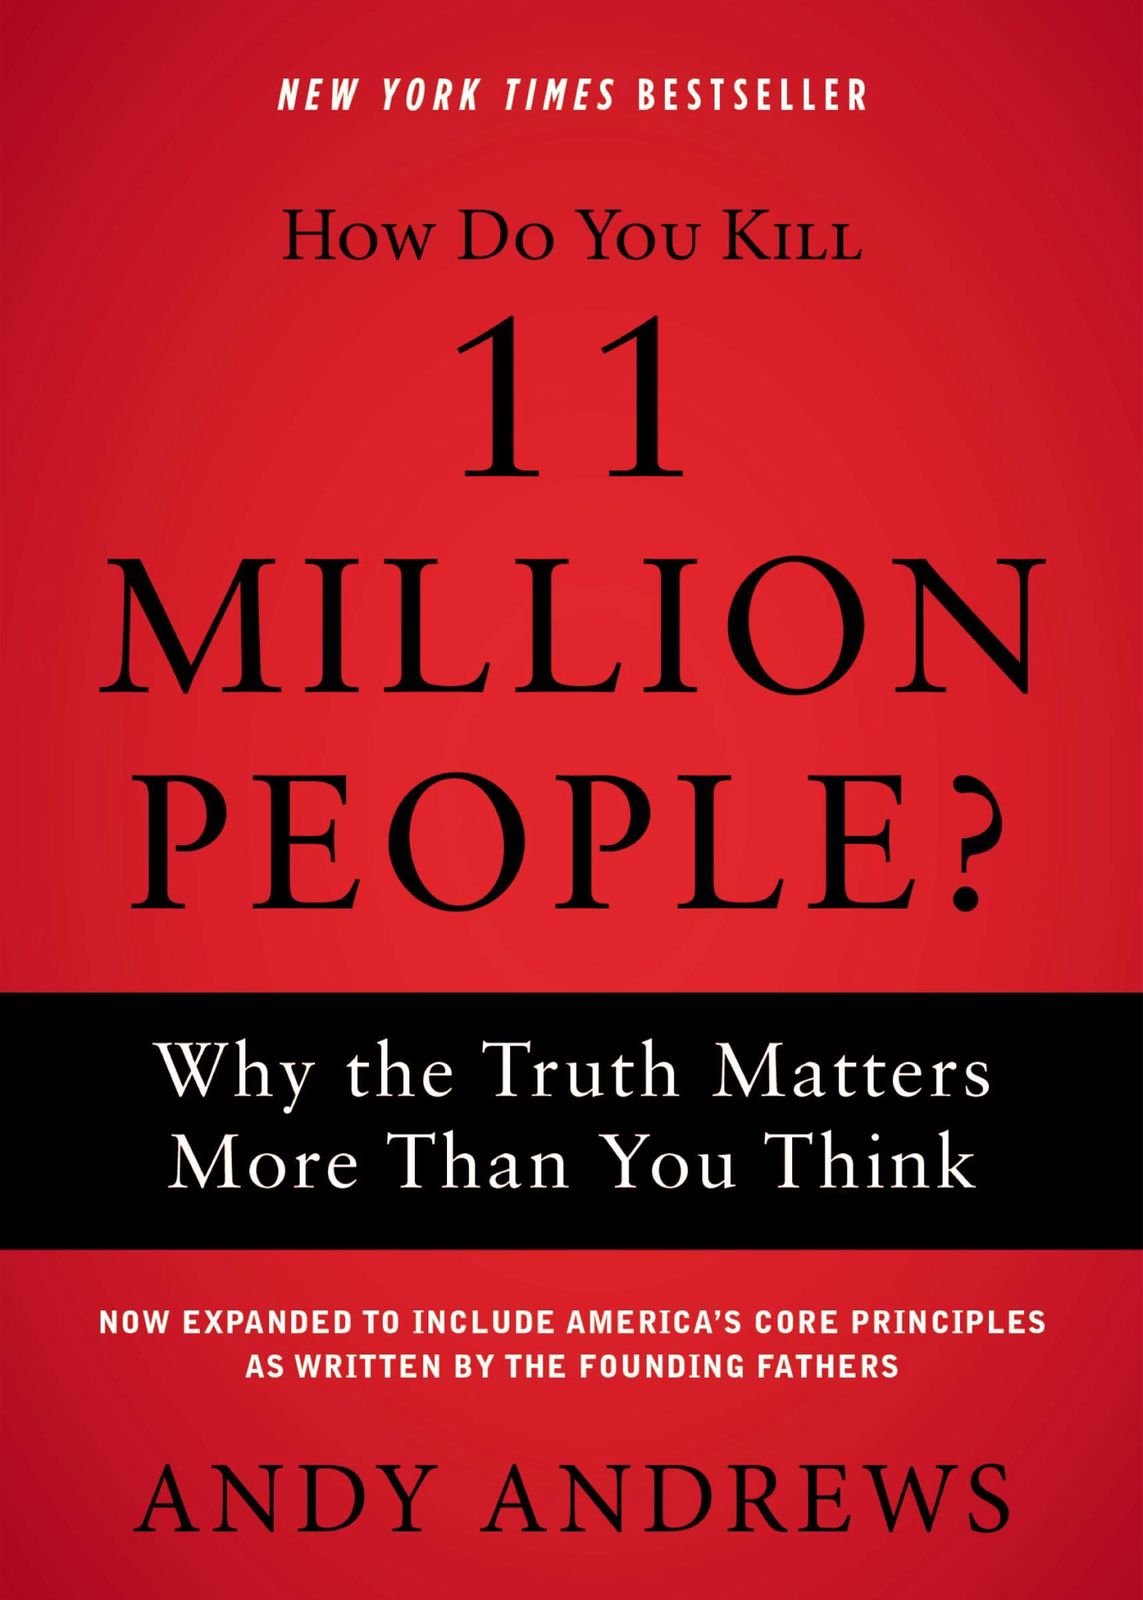 How to Kill 11 Million People